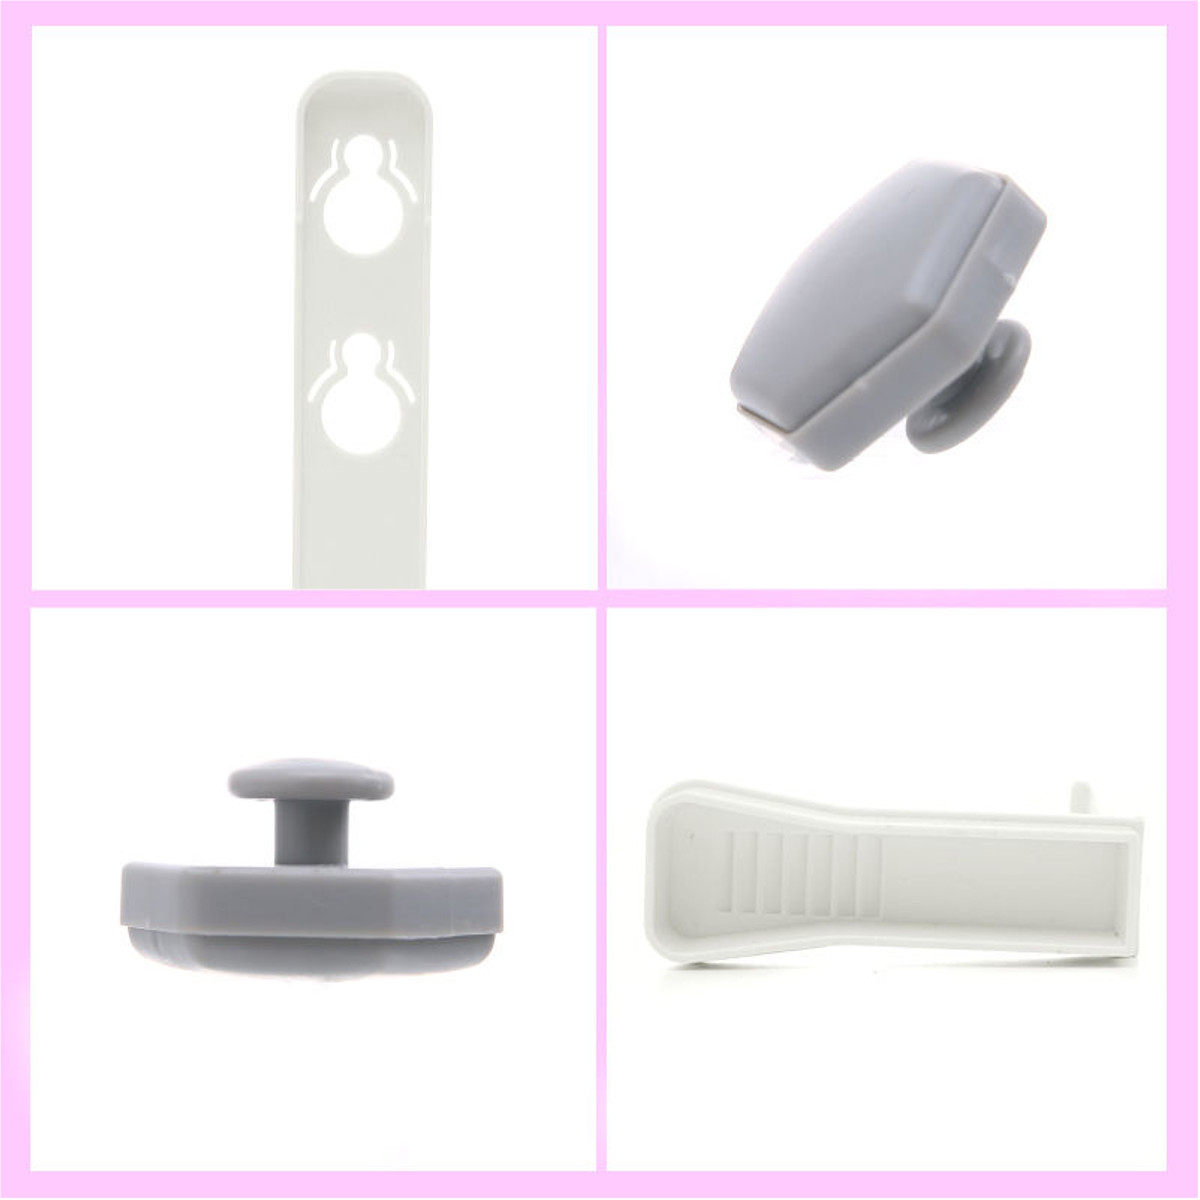 4pcs-Triangle-Bed-Sheet-Mattress-Holder-Fastener-Grippers-Clips-Suspender-Strap-Clamp-1568989